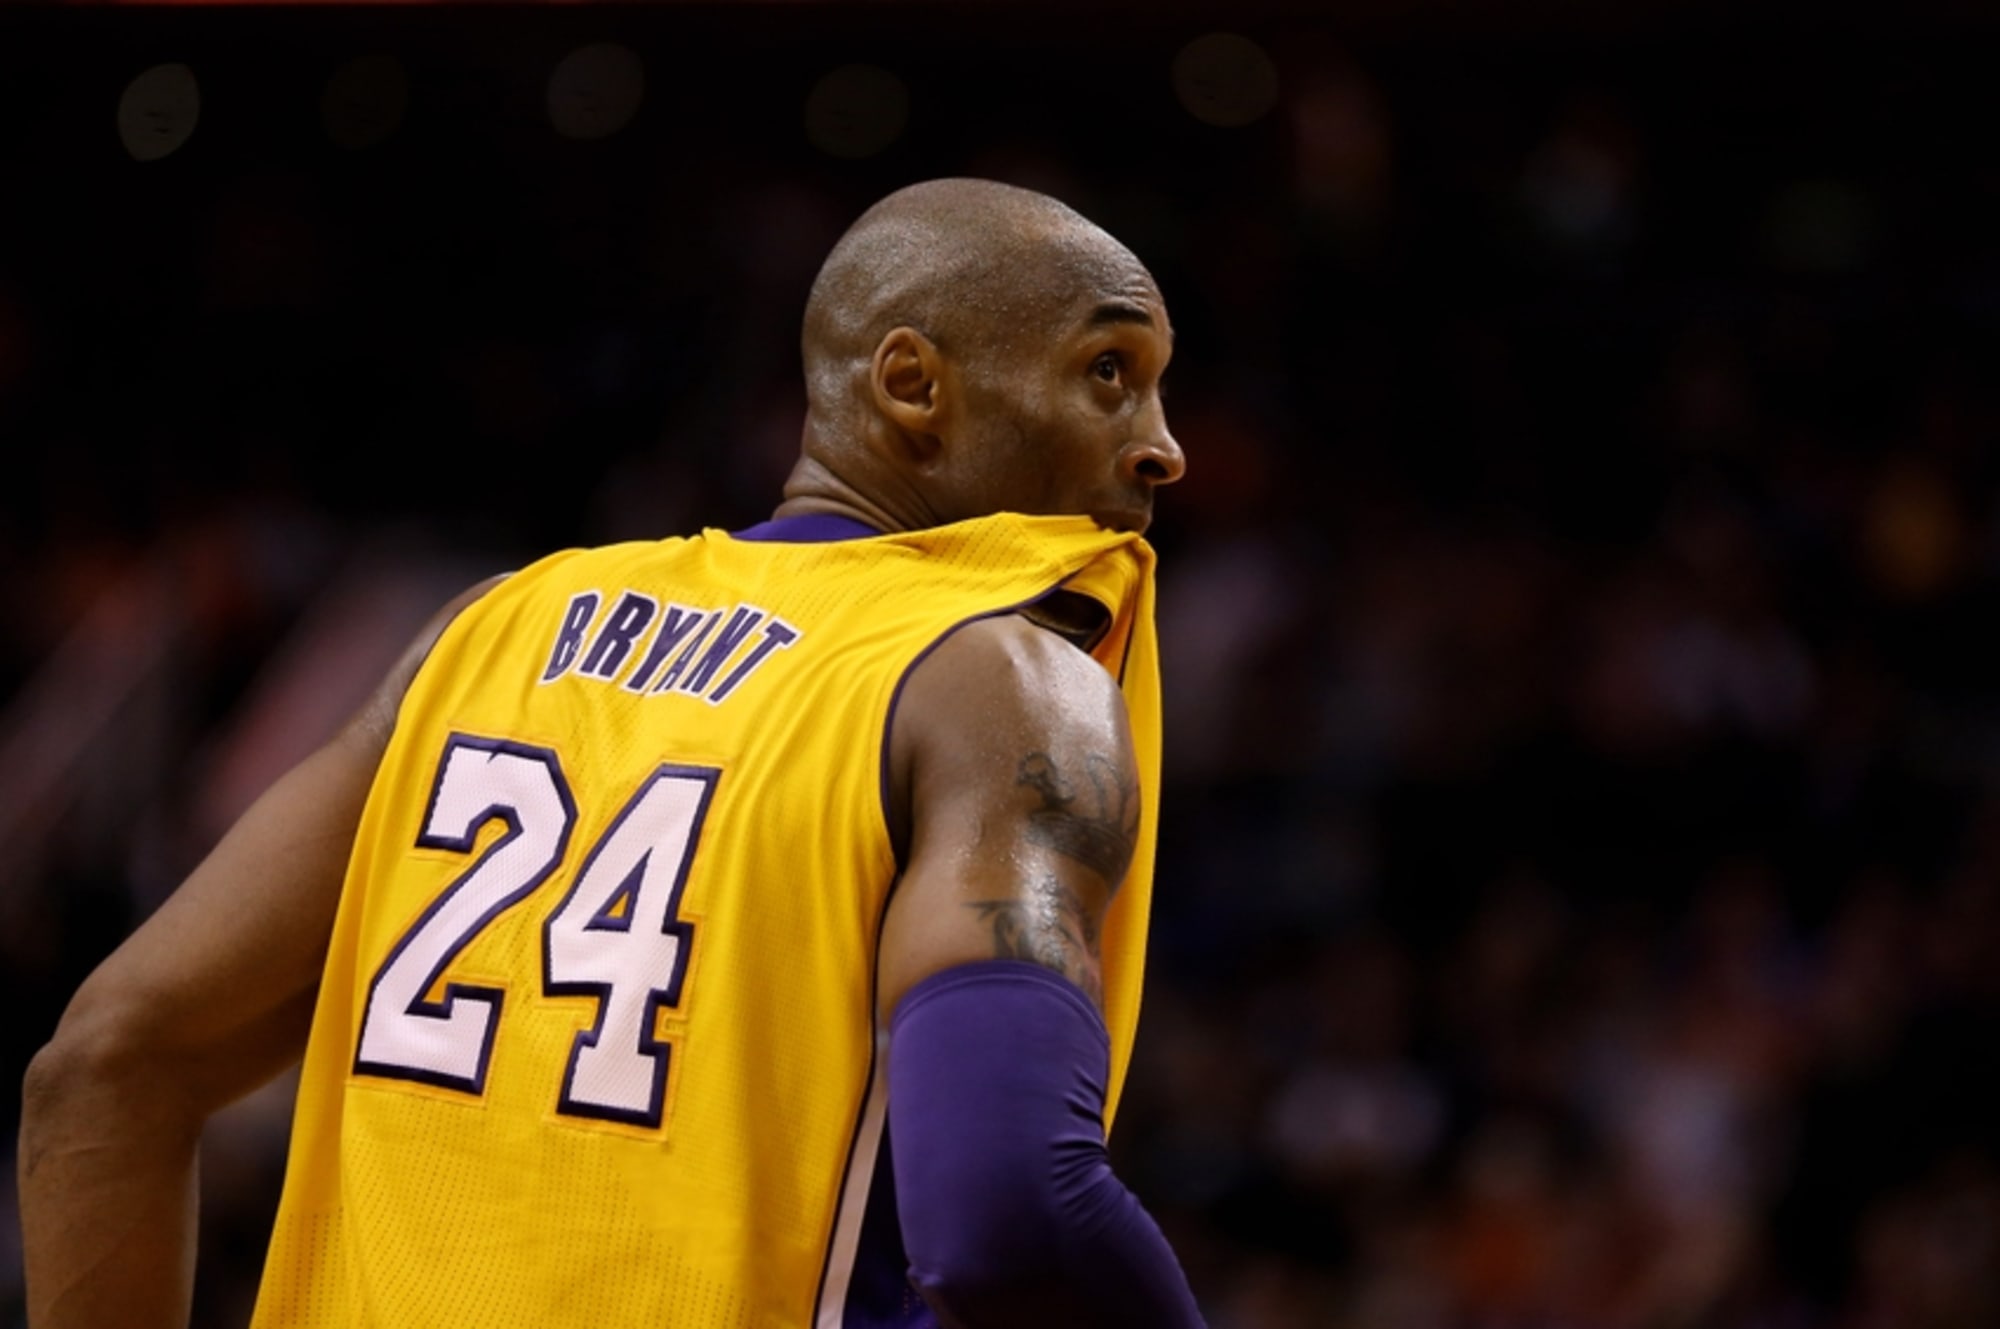 Kobe Bryant Now Age 36, Fighting To The Finish Line